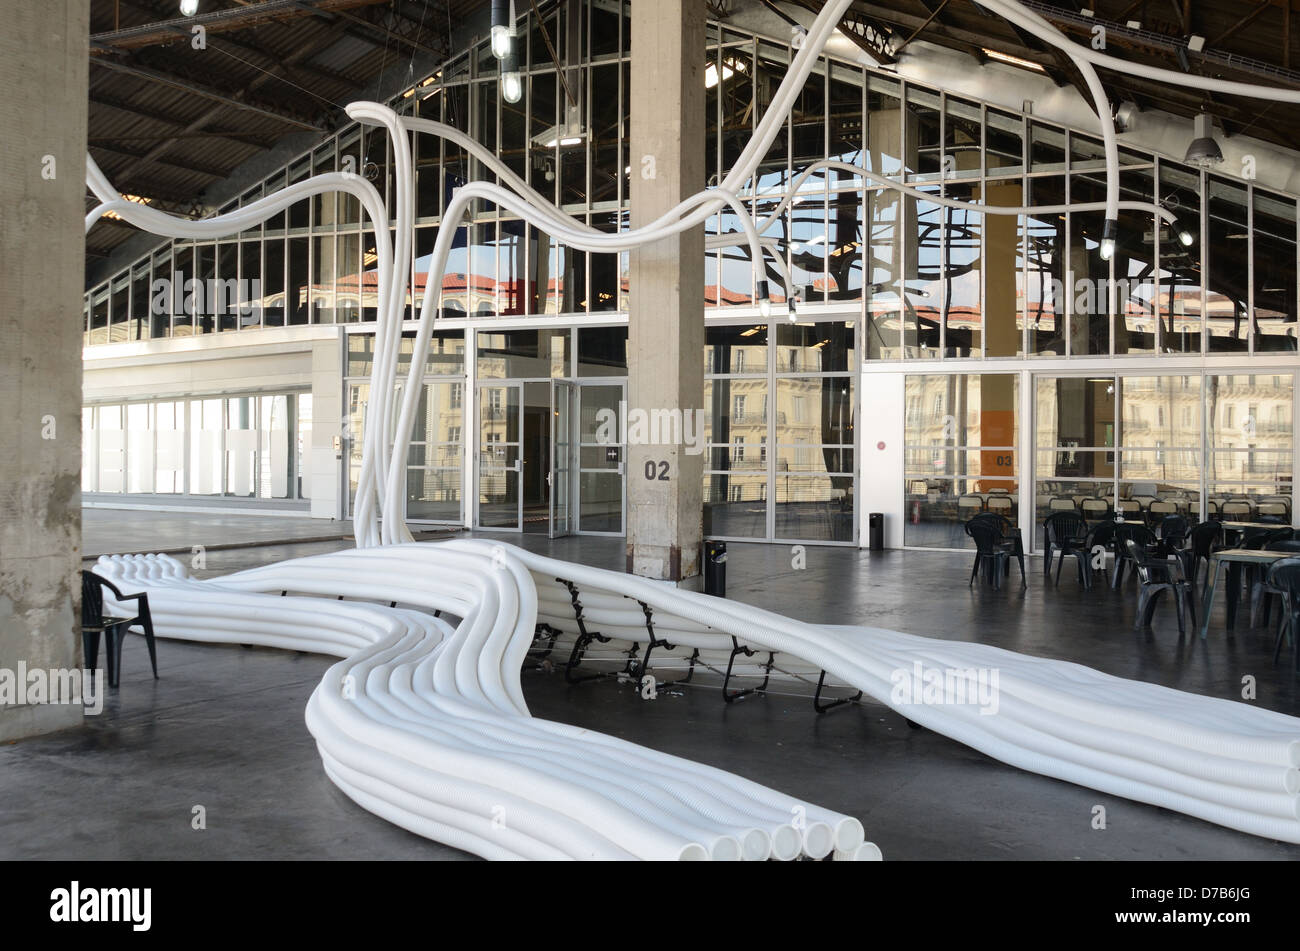 Tube Bench Made of Plastic Tubing at the Entrance to the J1 Exhibition Hall or Gallery Marseille France Stock Photo